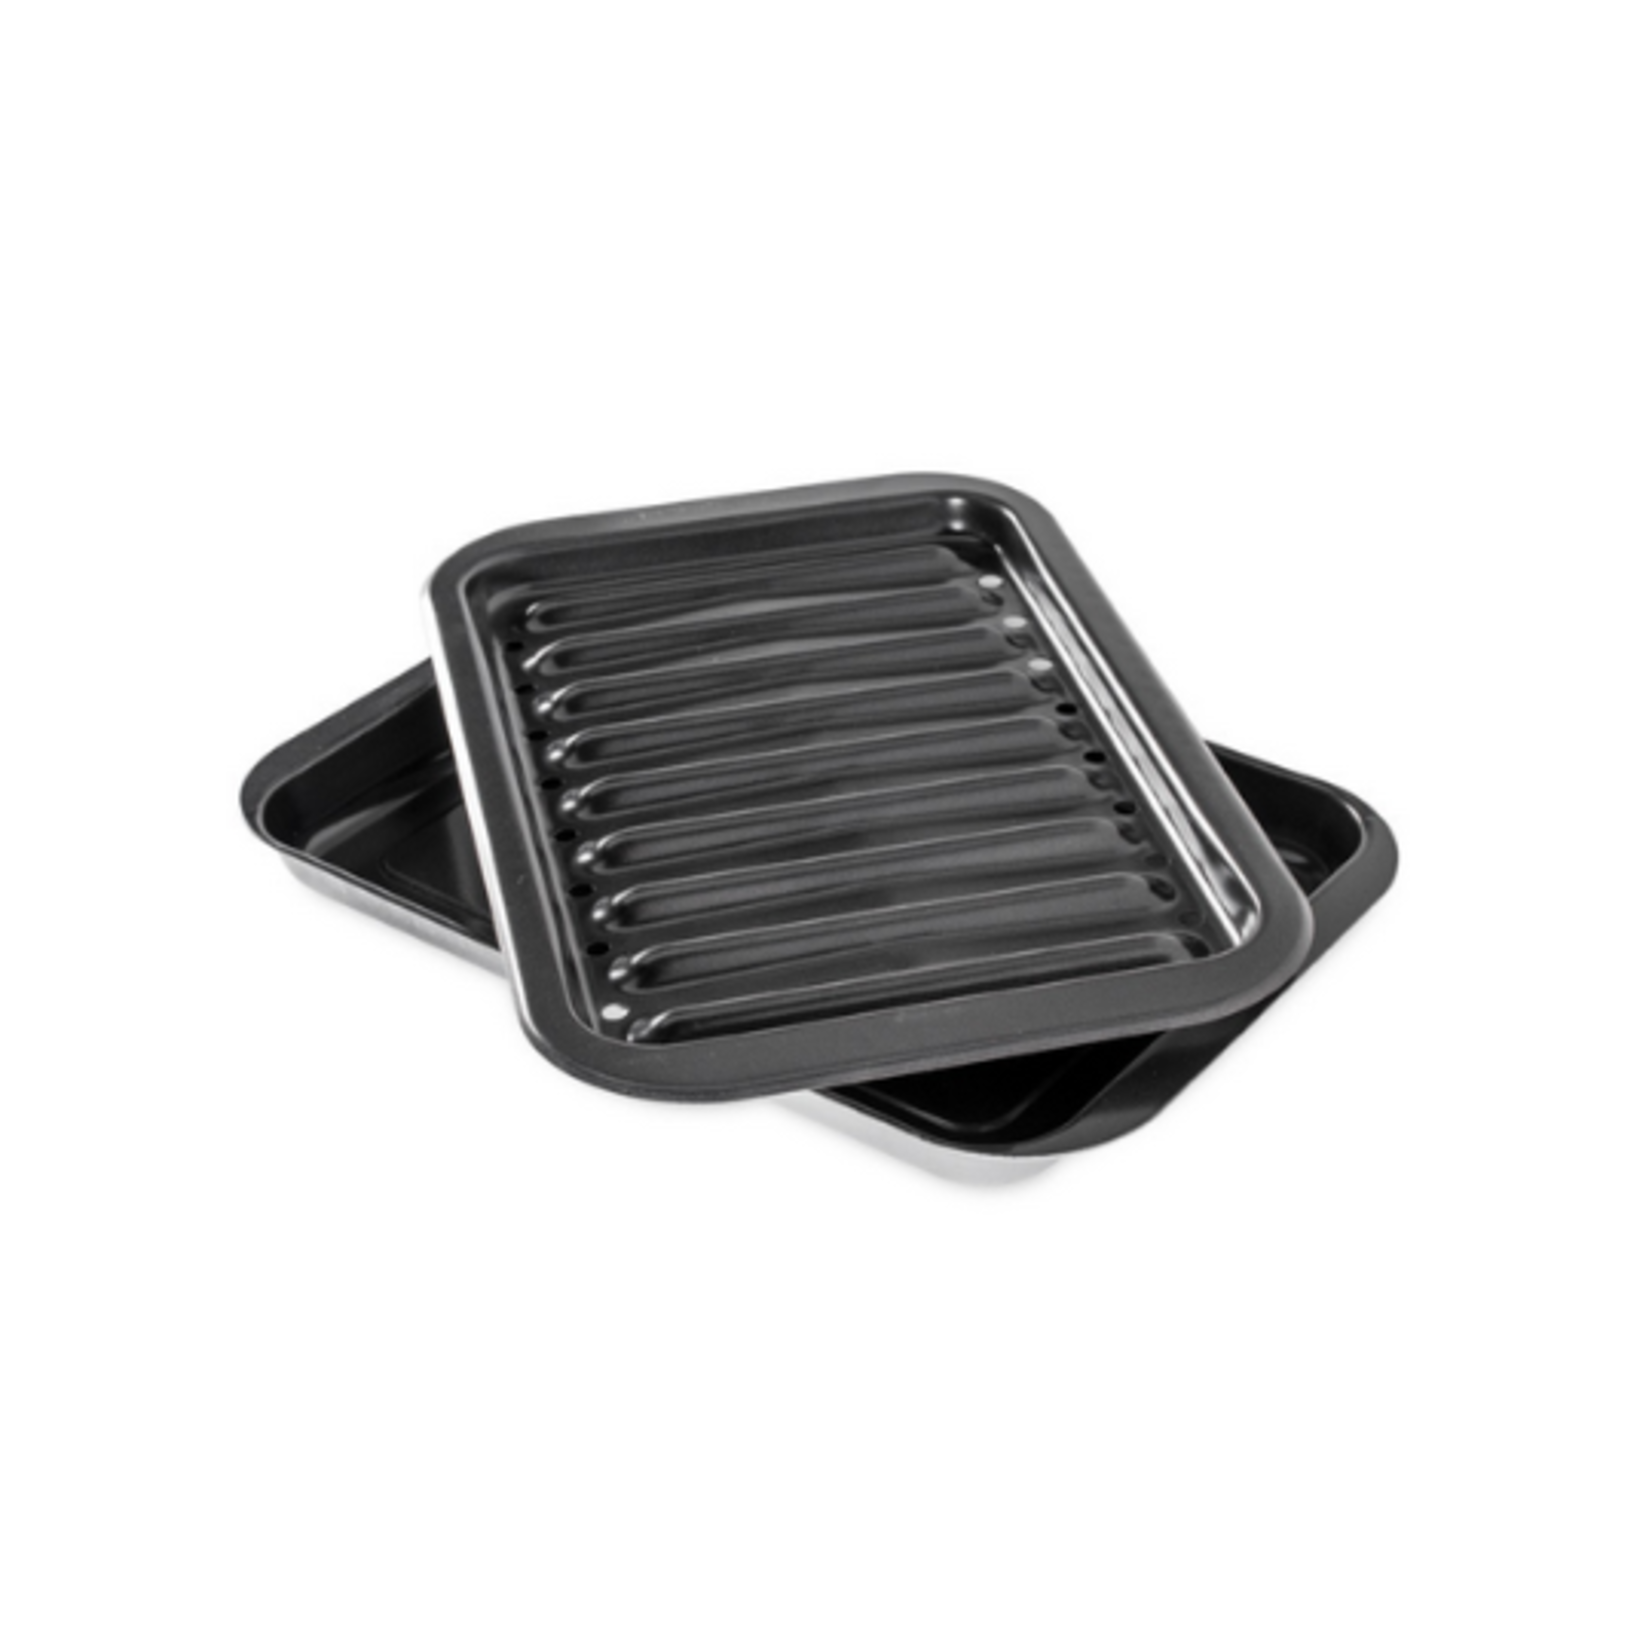 Nordicware Broiler Pan for Oven/Grill 9" x 13"